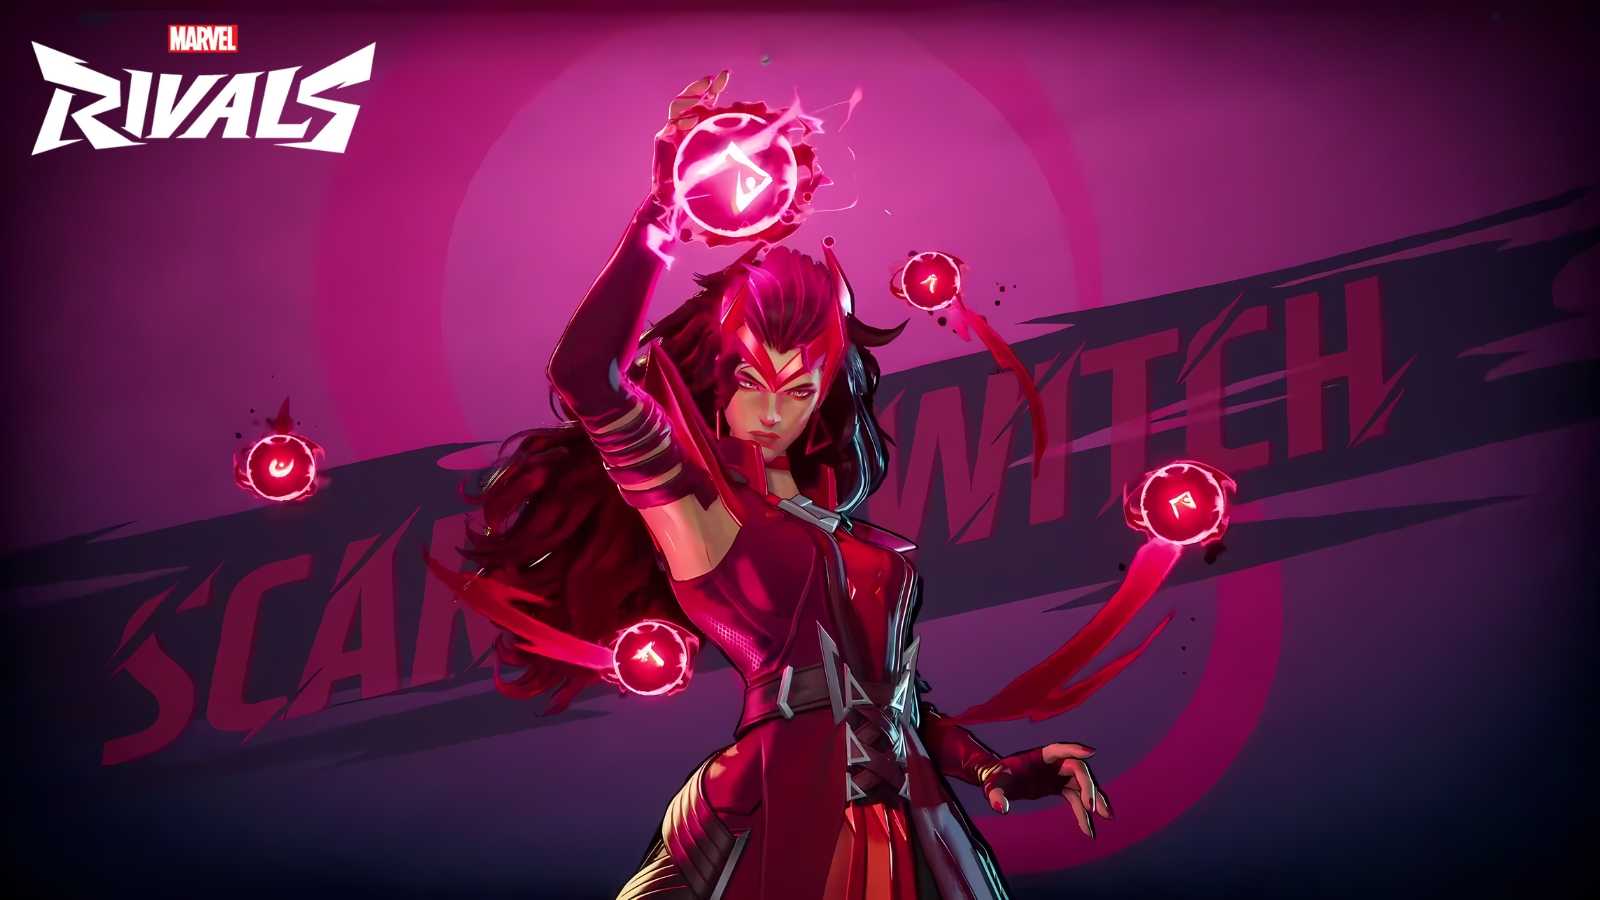 Scarlet Witch cover Marvel Rivals